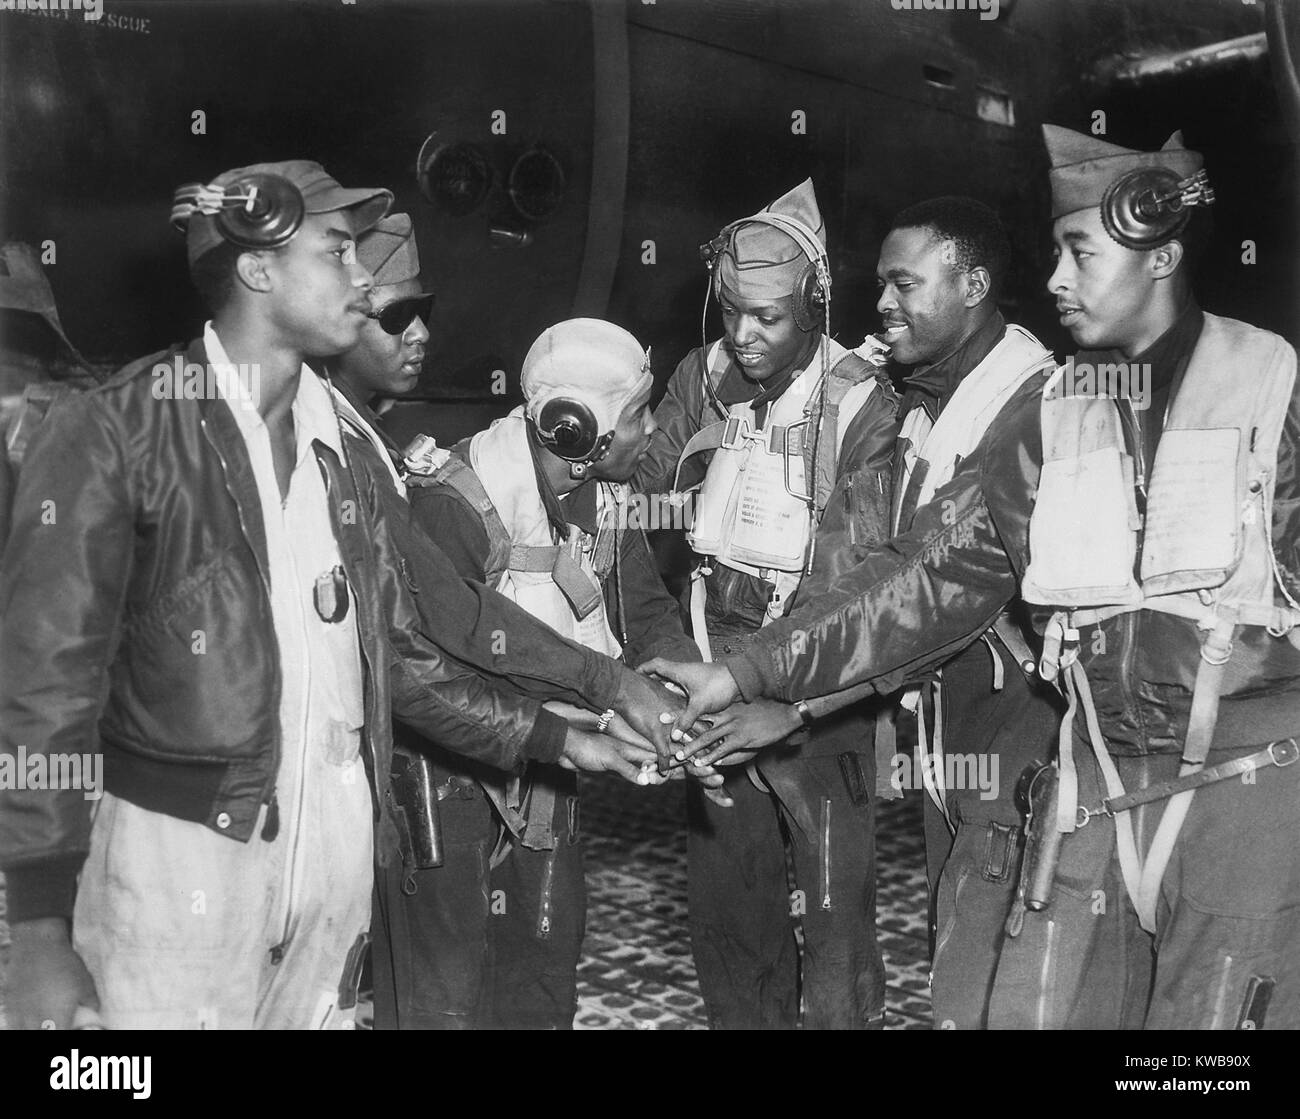 Six African American Air Force gunners join hands. They are part of 17th Bomb Wing night interdiction teams in Korea. Air interdiction attacked ground targets not close to friendly ground forces. Korean War, 1950-53. (BSLOC 2014 11 209) Stock Photo